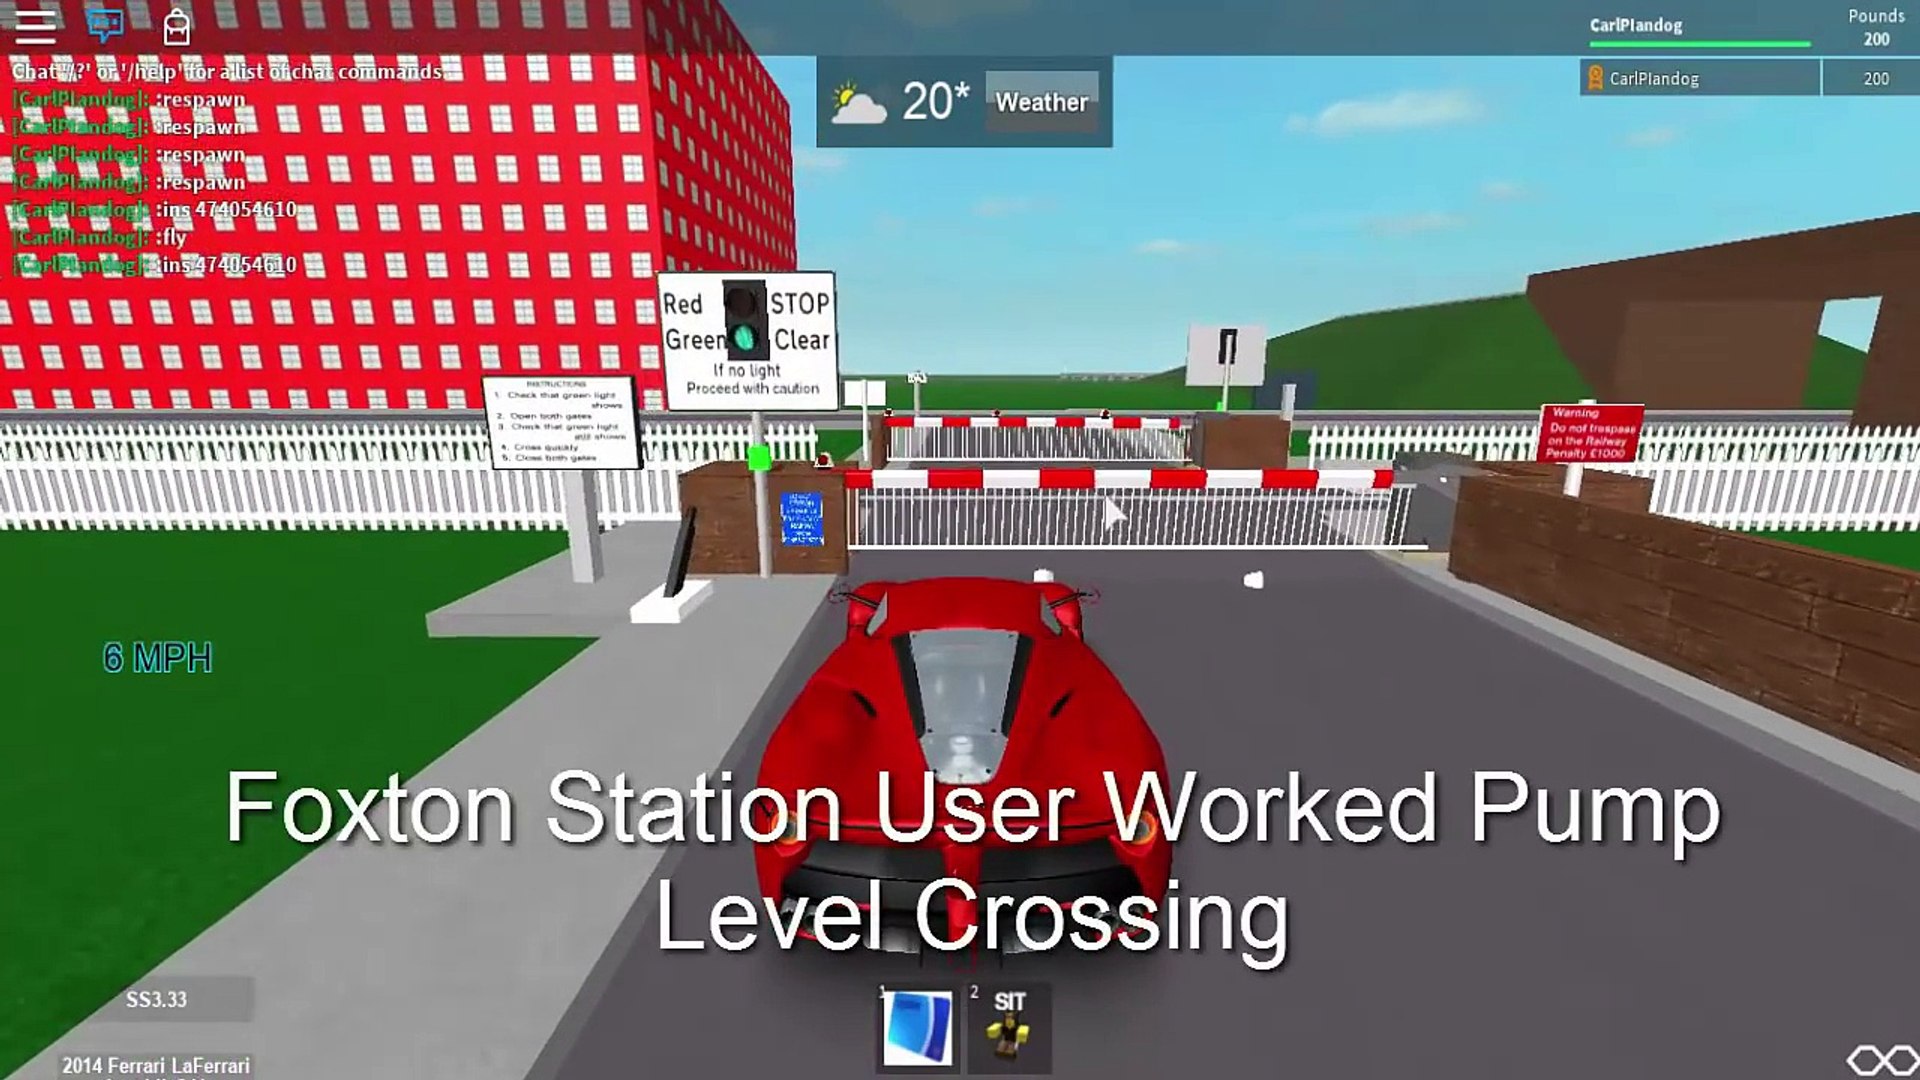 Roblox Level Crossings In Foxton And Area January 2017 Video Dailymotion - ashworth bodley area level crossings roblox